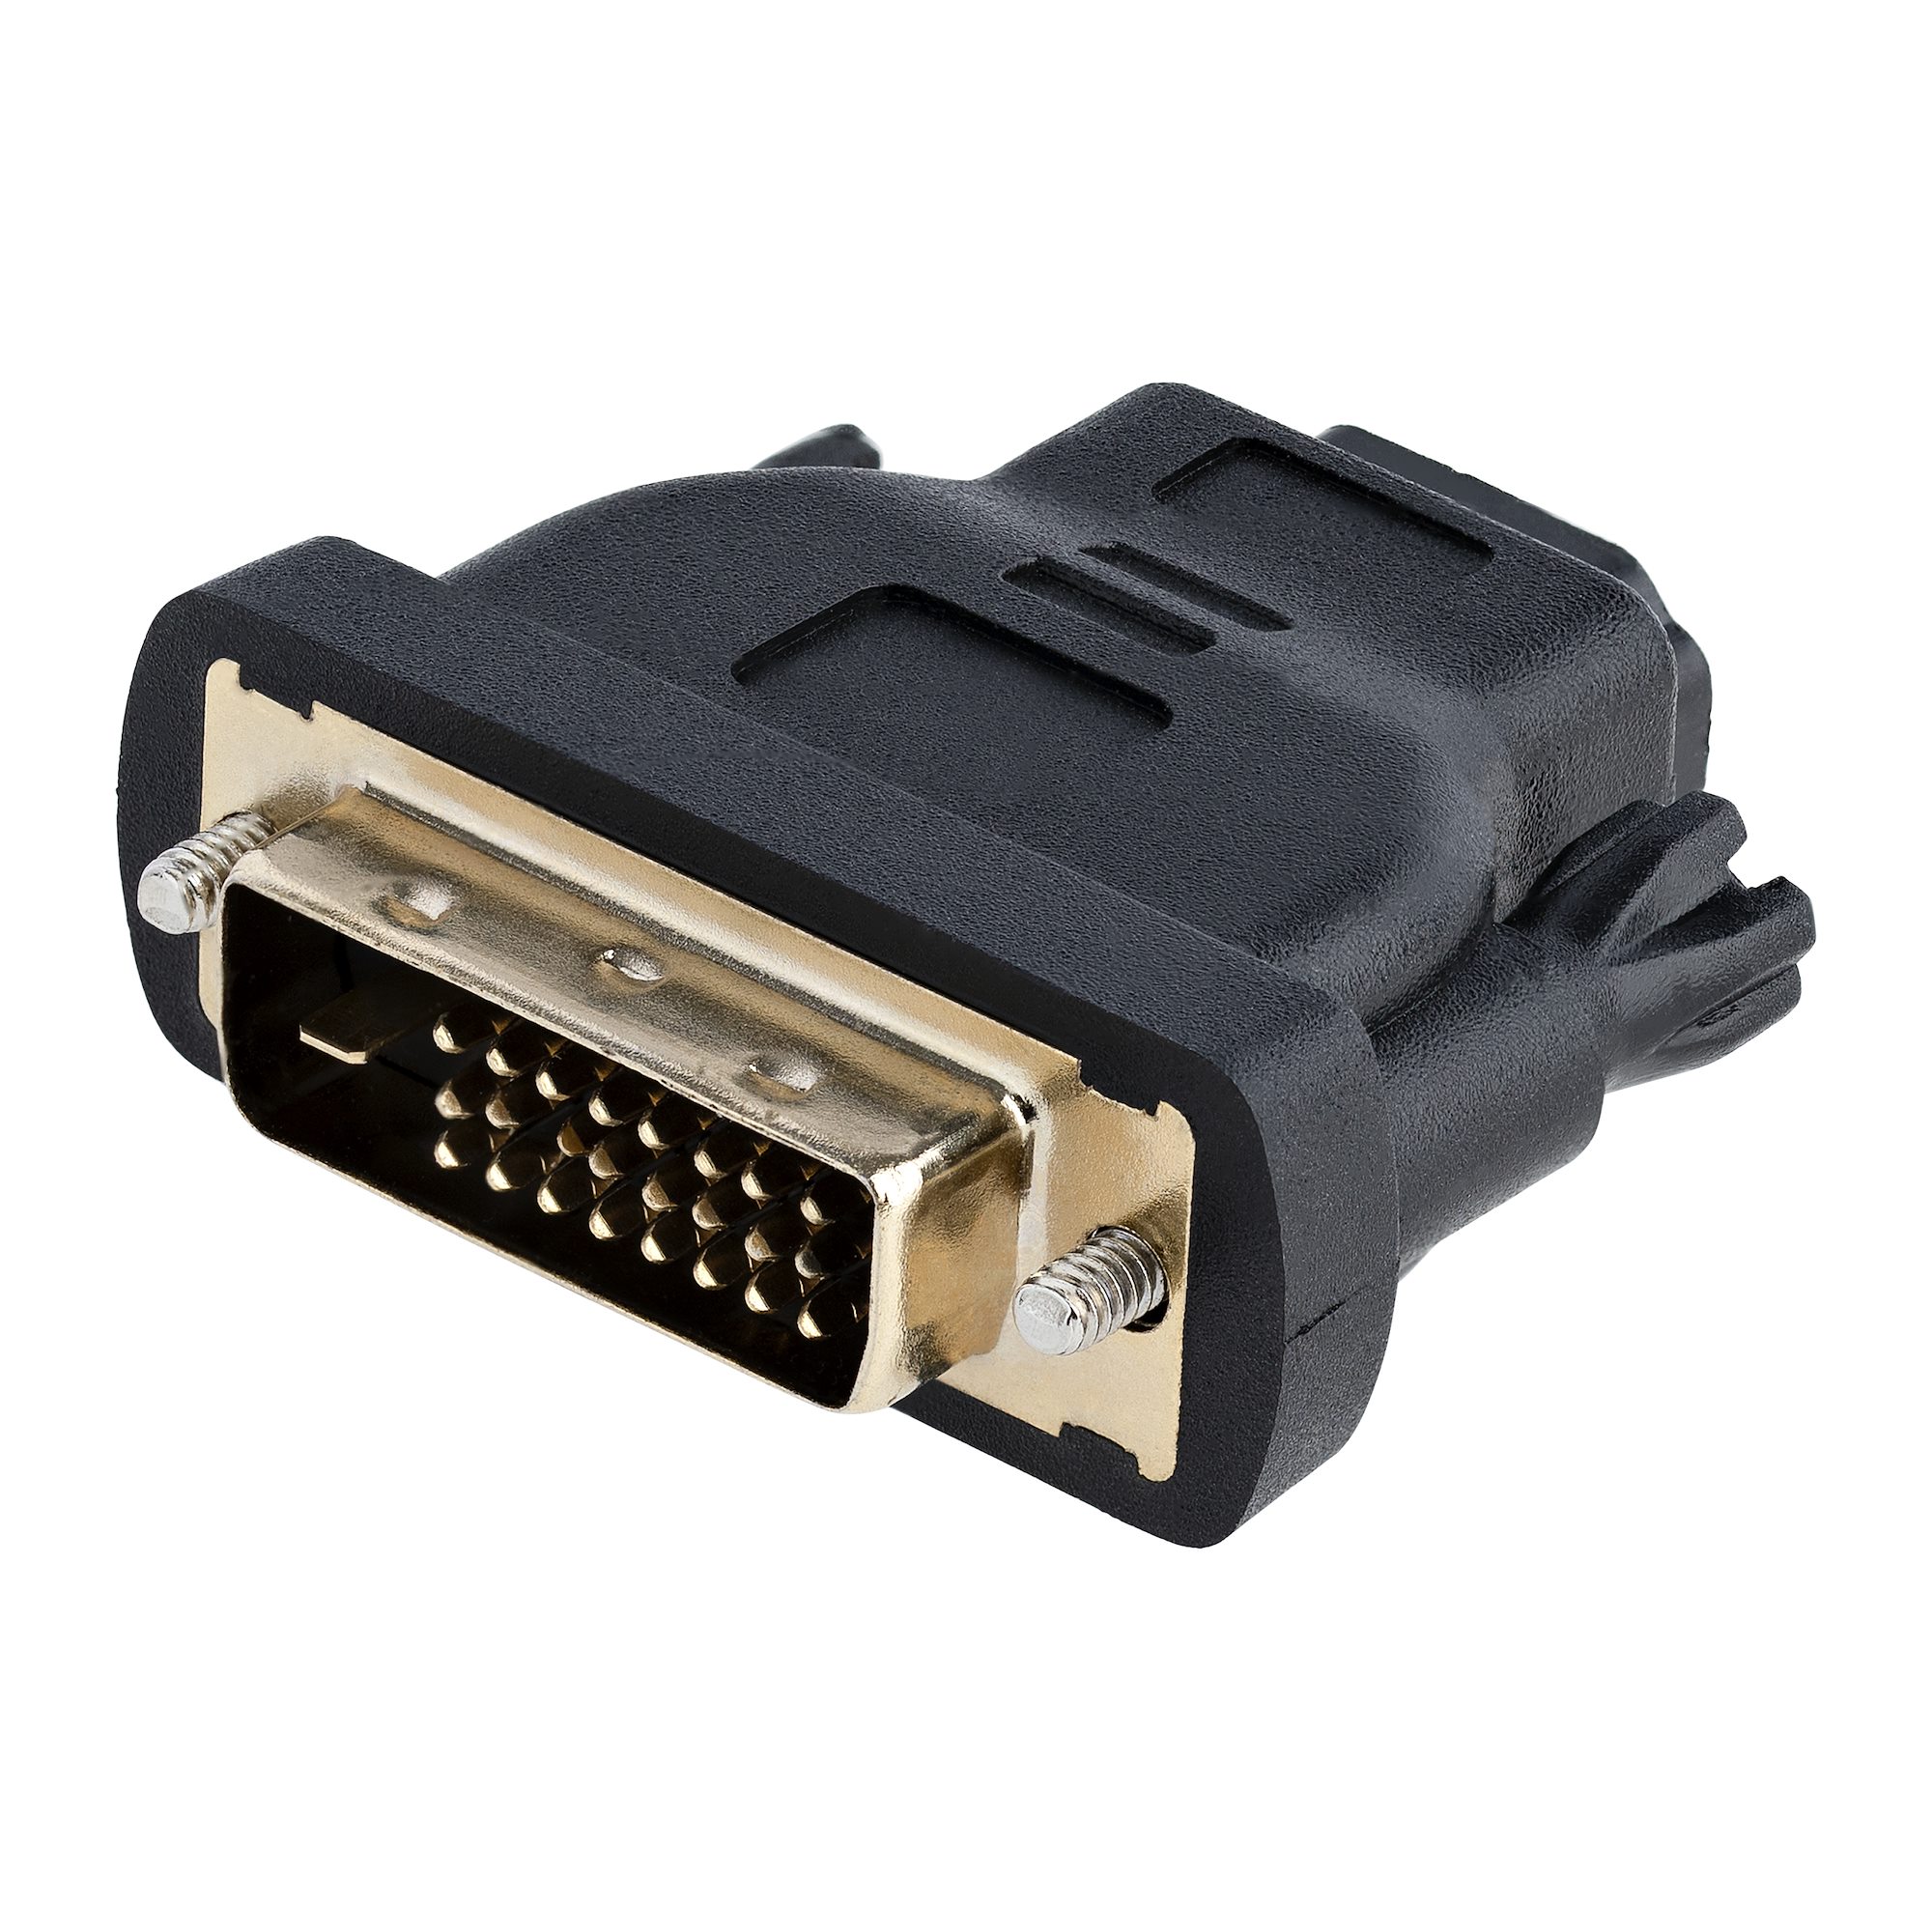 【HDMIDVIFM】HDMI TO DVI-D ADAPTER - F/M